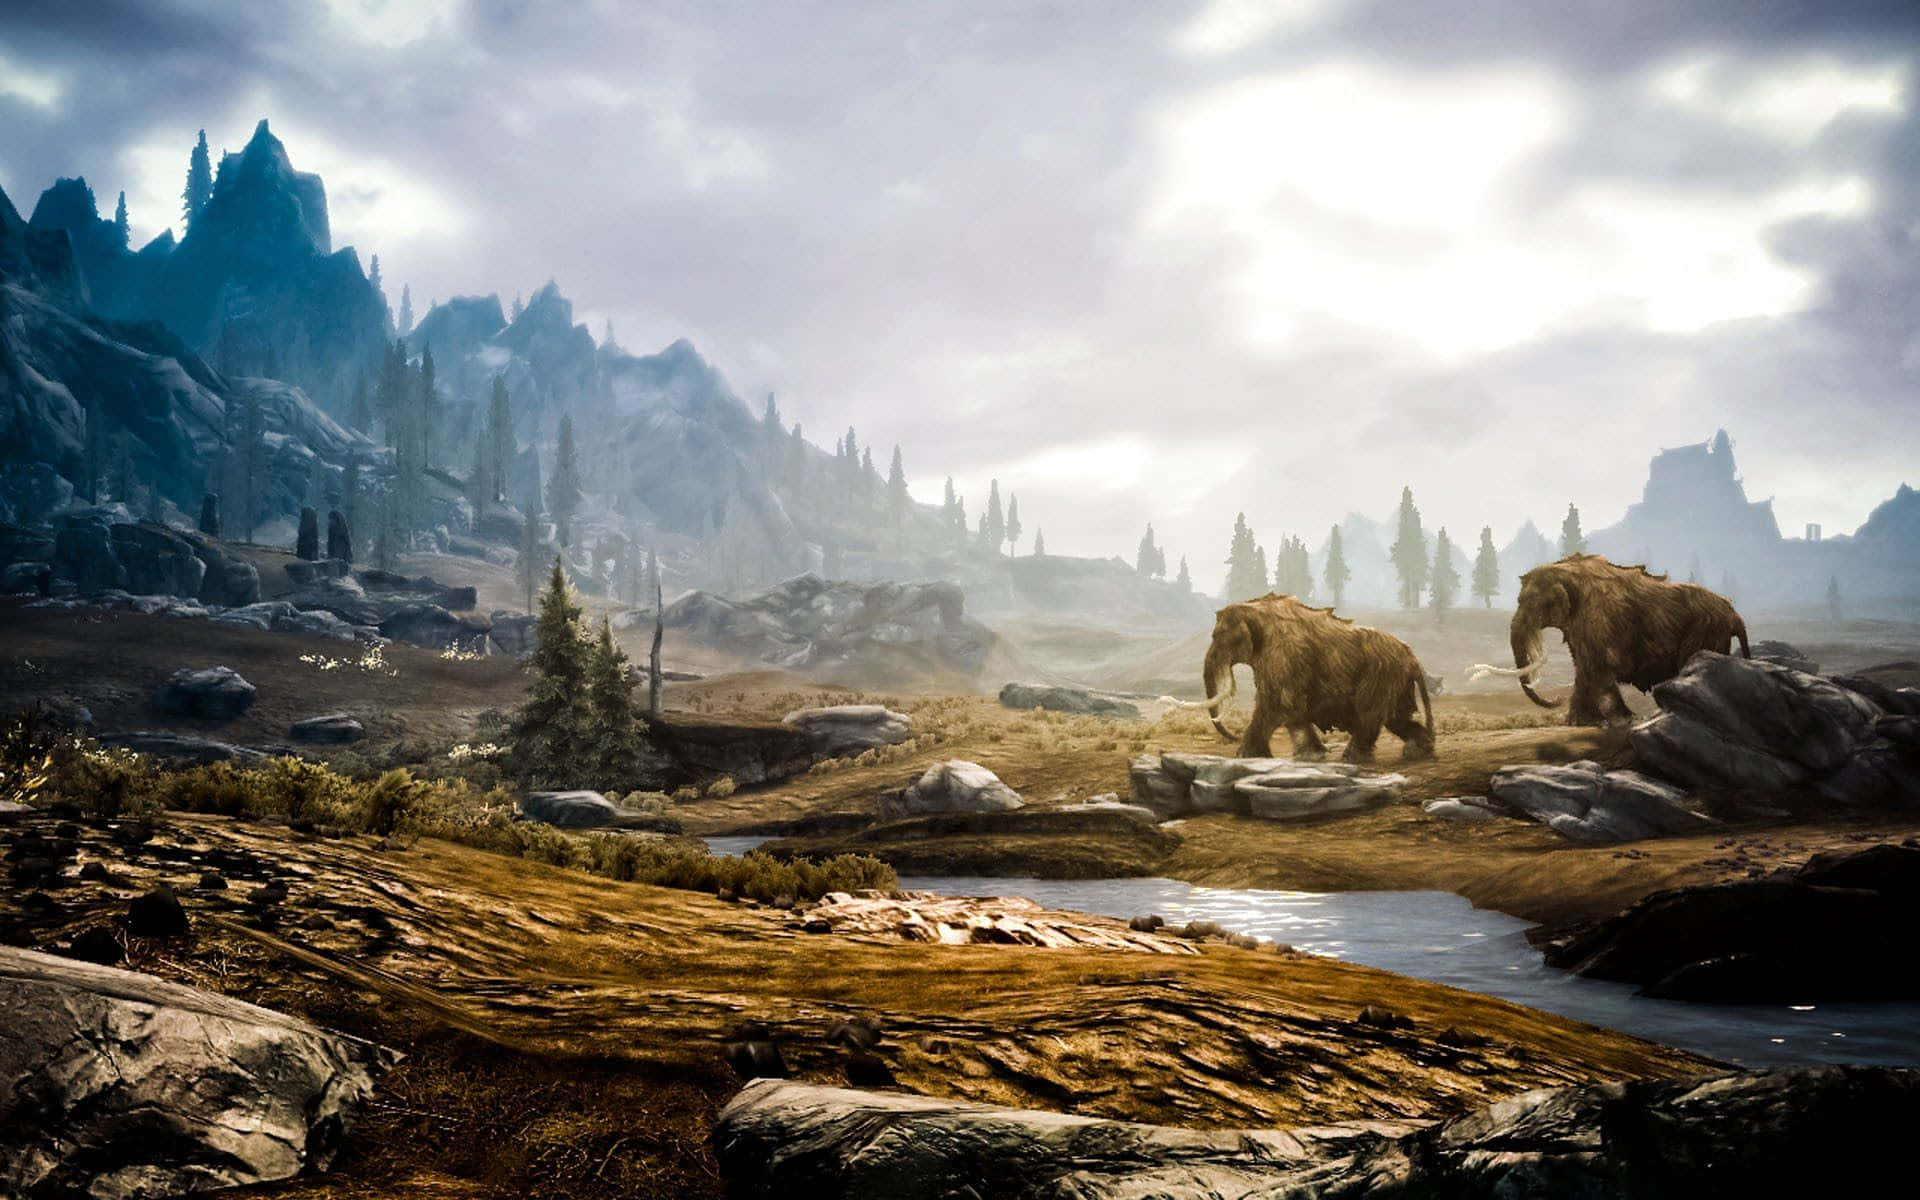 An epic journey awaits in Skyrim